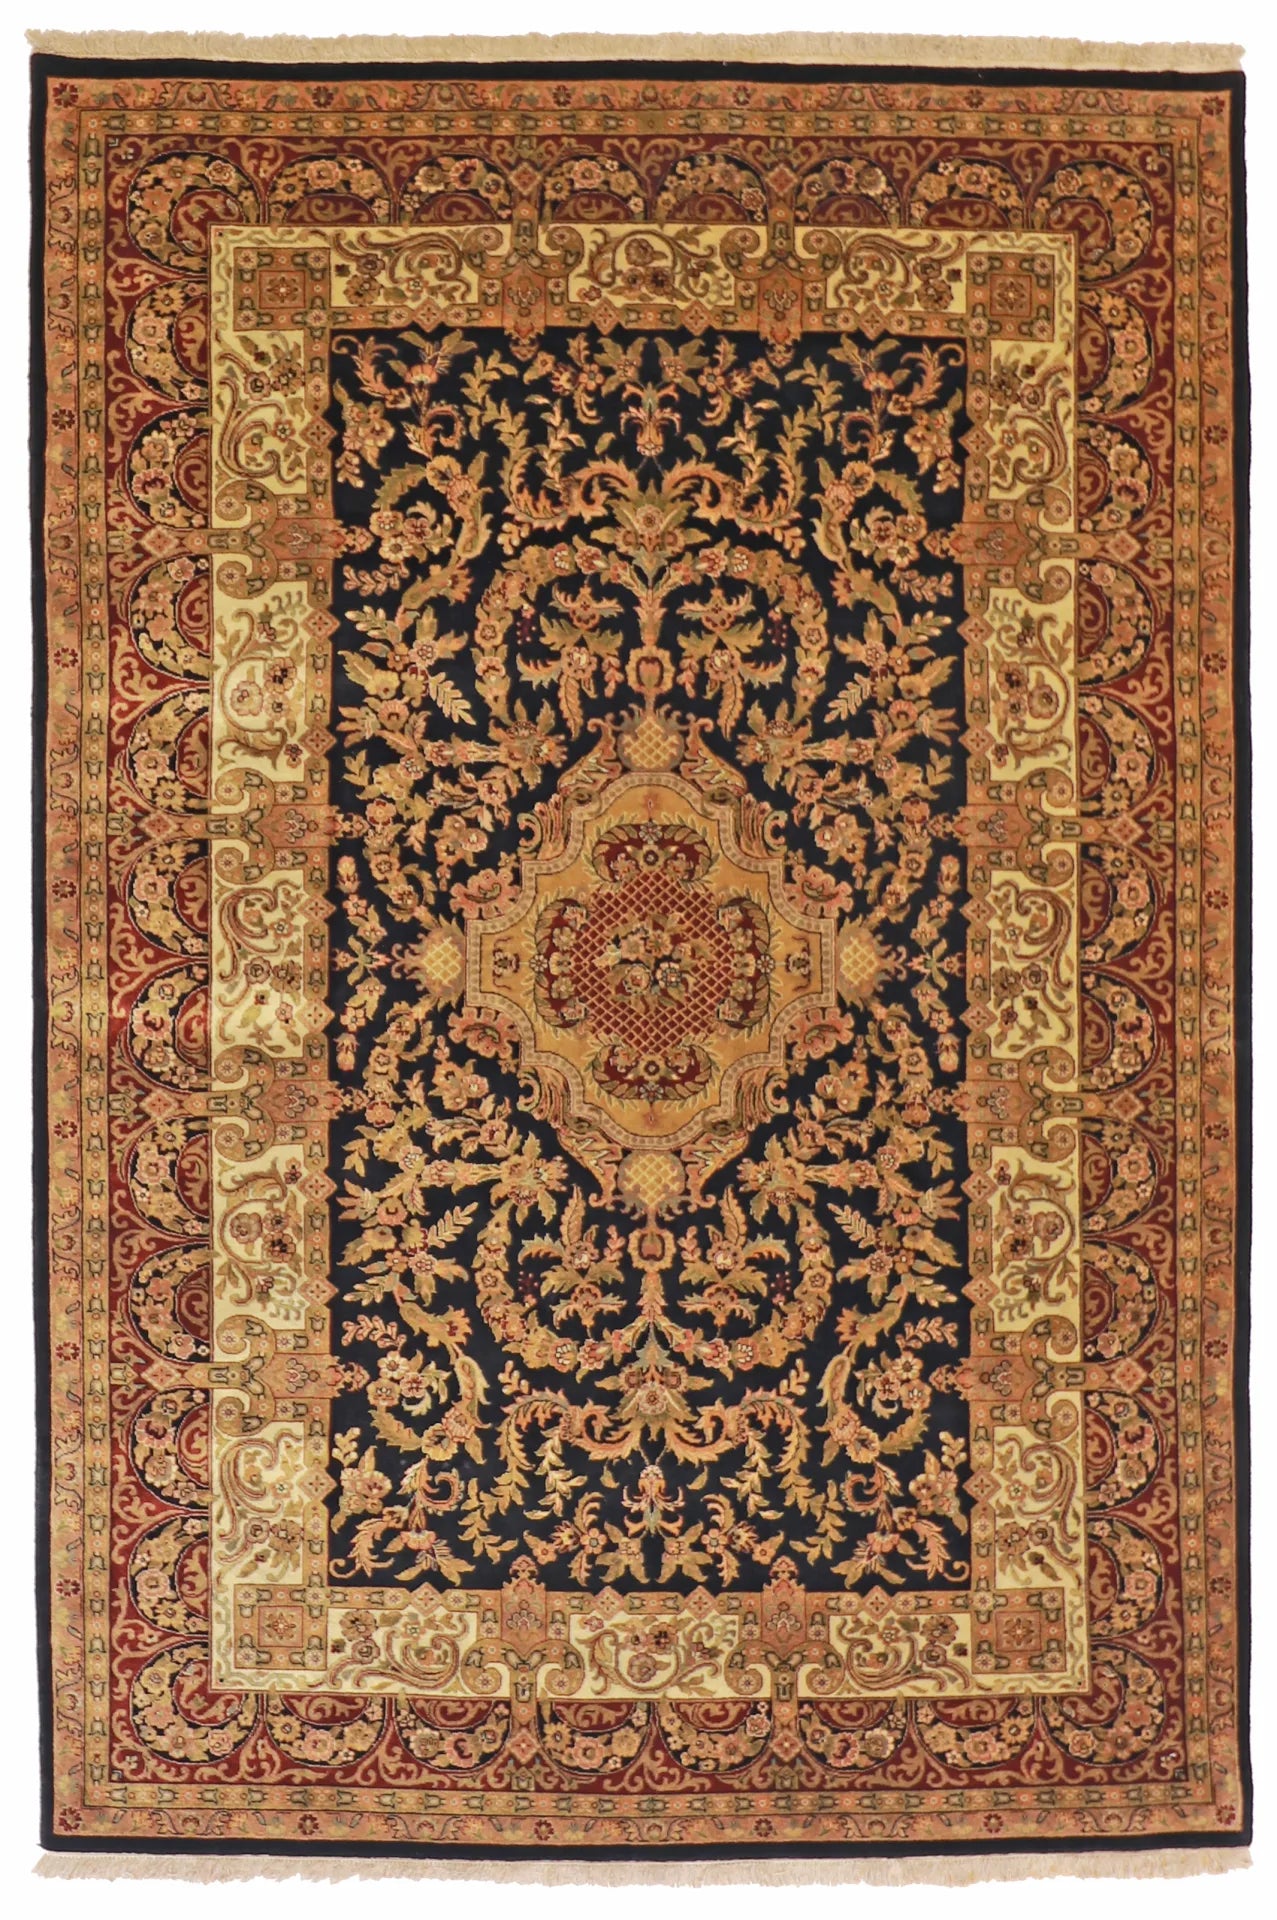 6x9 - Abado Fine Floral Rectangle - Hand Knotted Rug